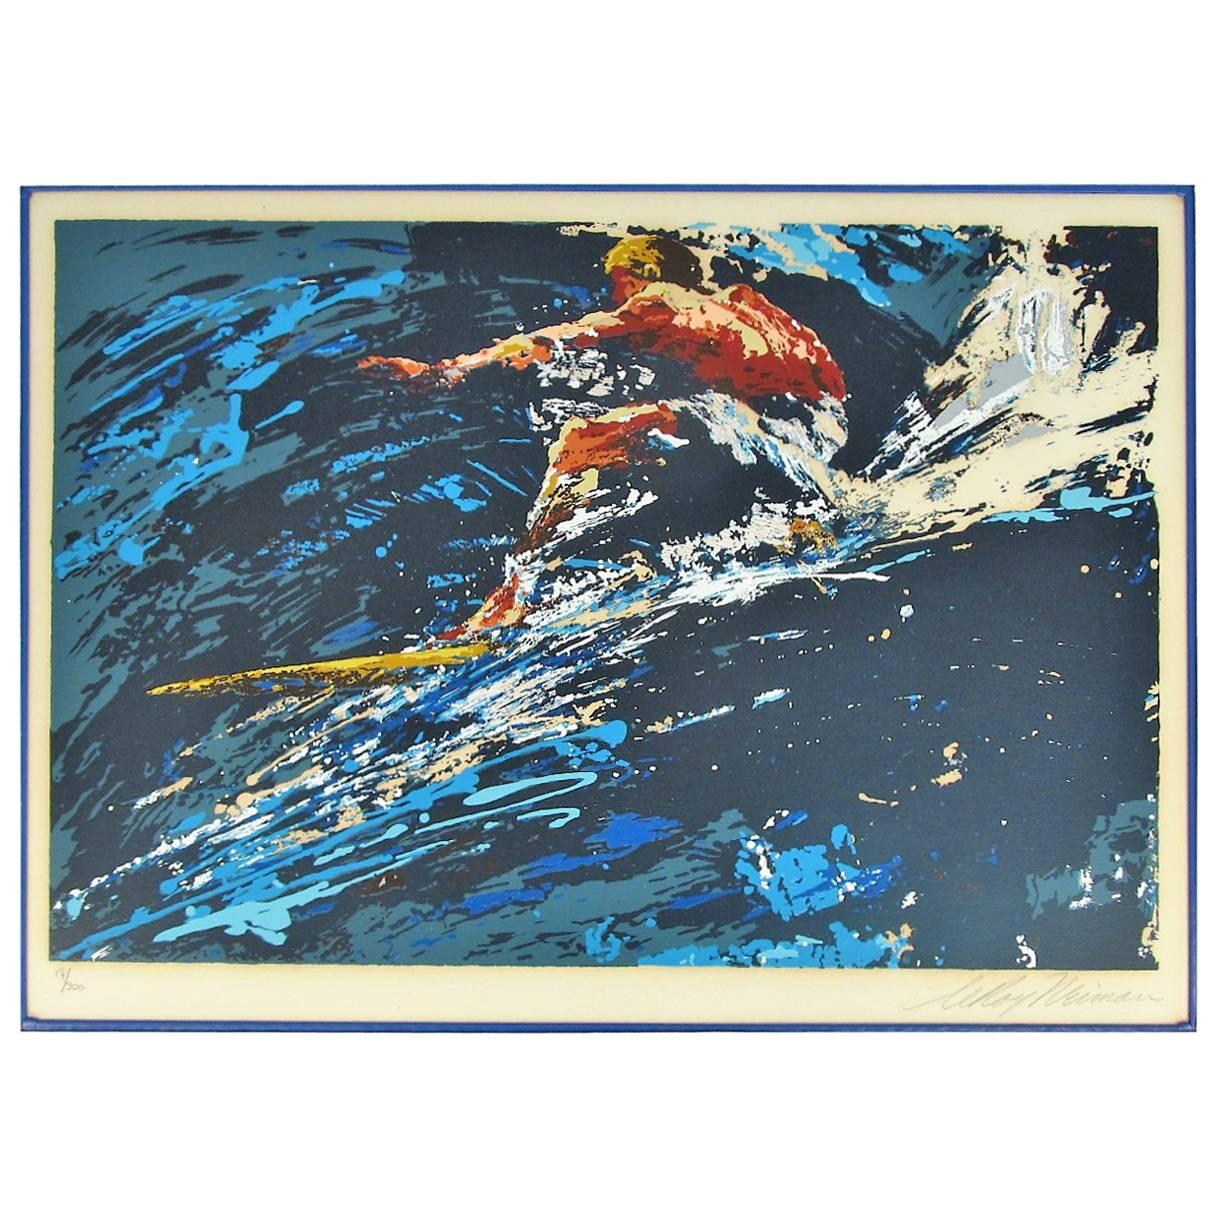 Signed and Numbered 17/300 Leroy Neiman Serigraph "Surfer" 1973 For Sale